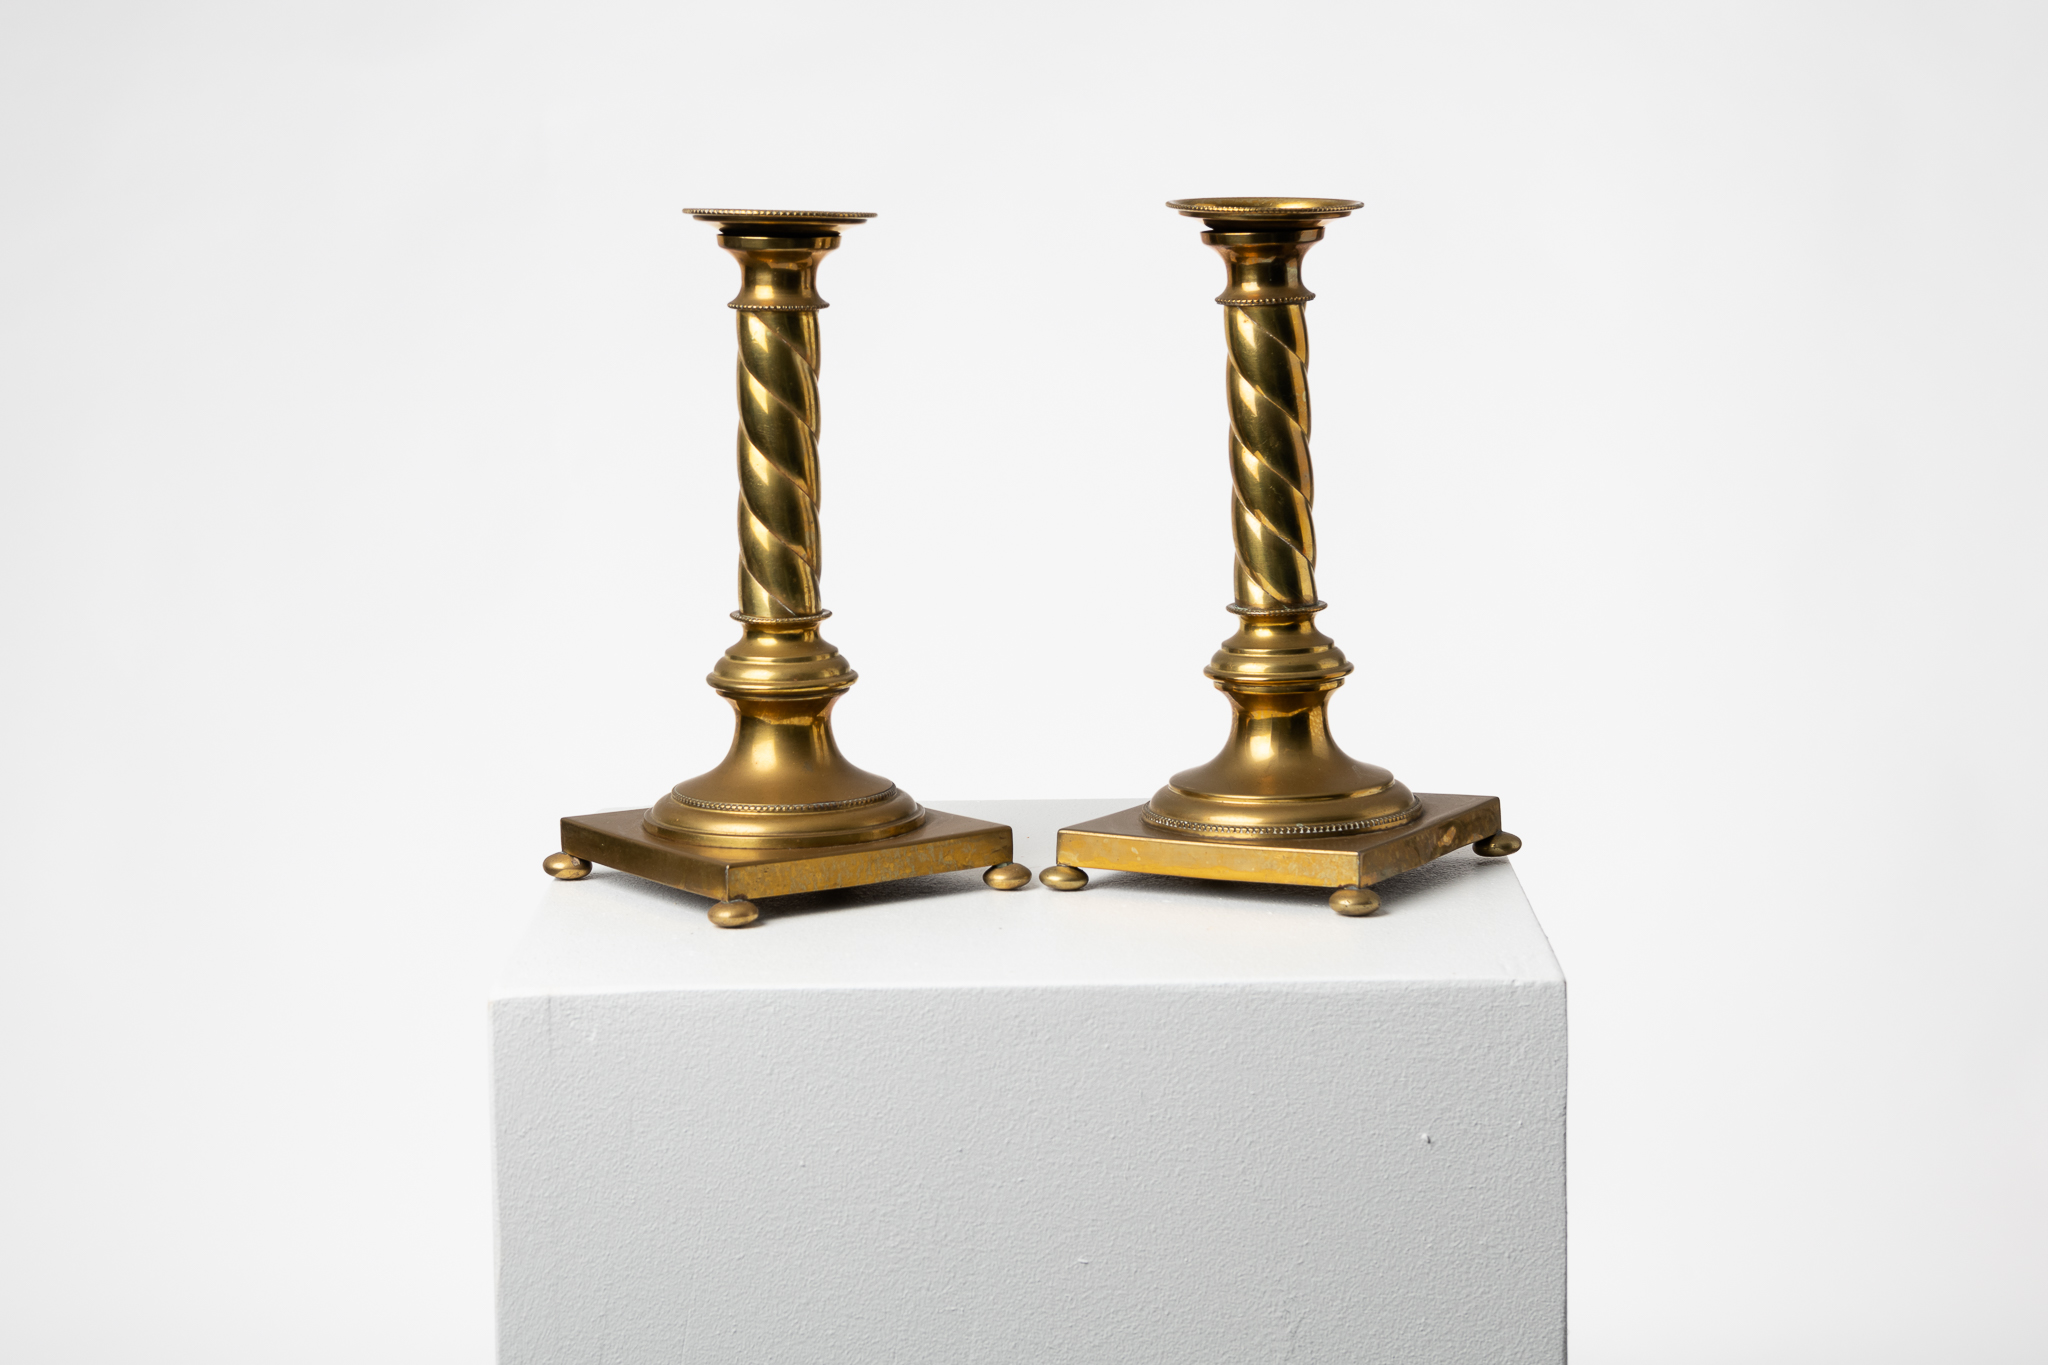  Swedish candle sticks in brass made during the later part of the 1800s. The pair are of the gustavian style with a square base, small round feet and a turned column